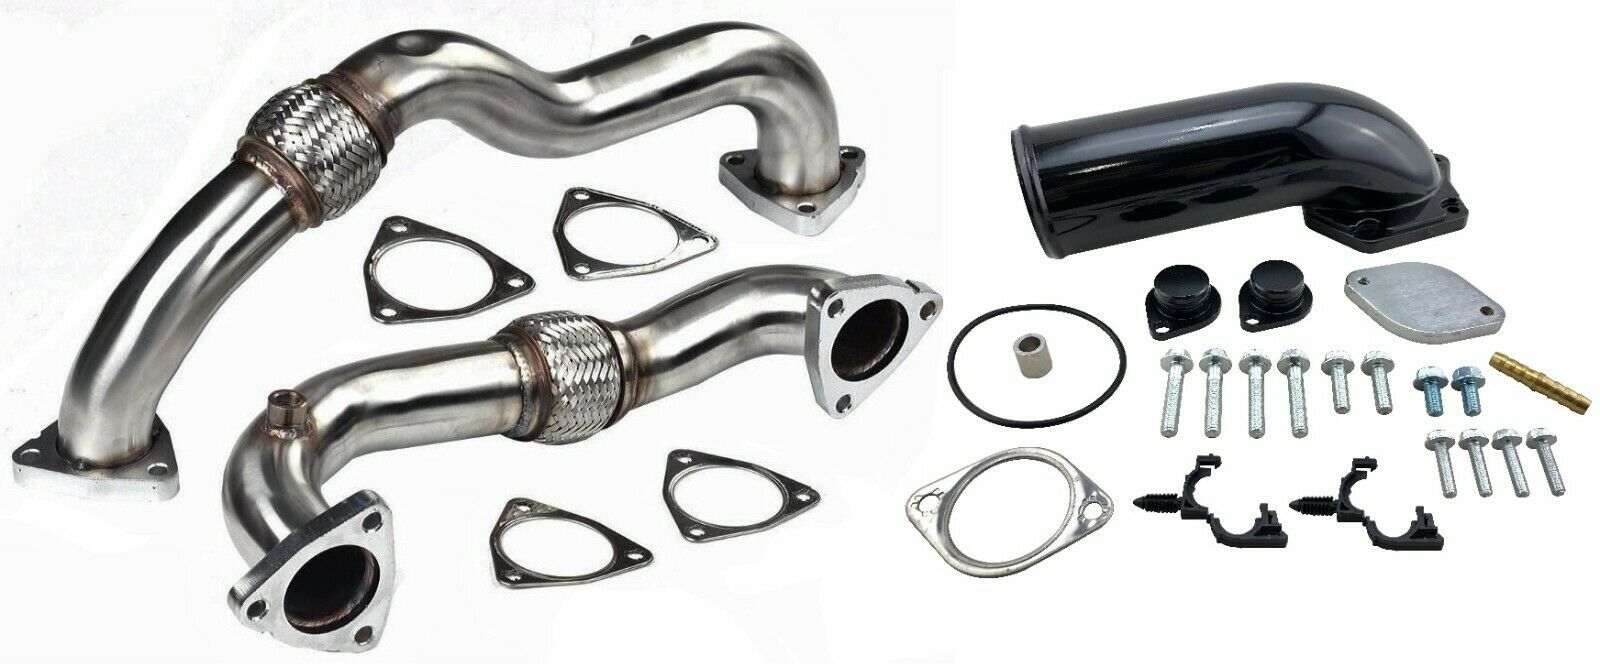 6.4 Powerstork EGR Delete Plates Bypass Exhaust Up Pipes for 2008 2009 2010 Ford 6.4L Diesel V8